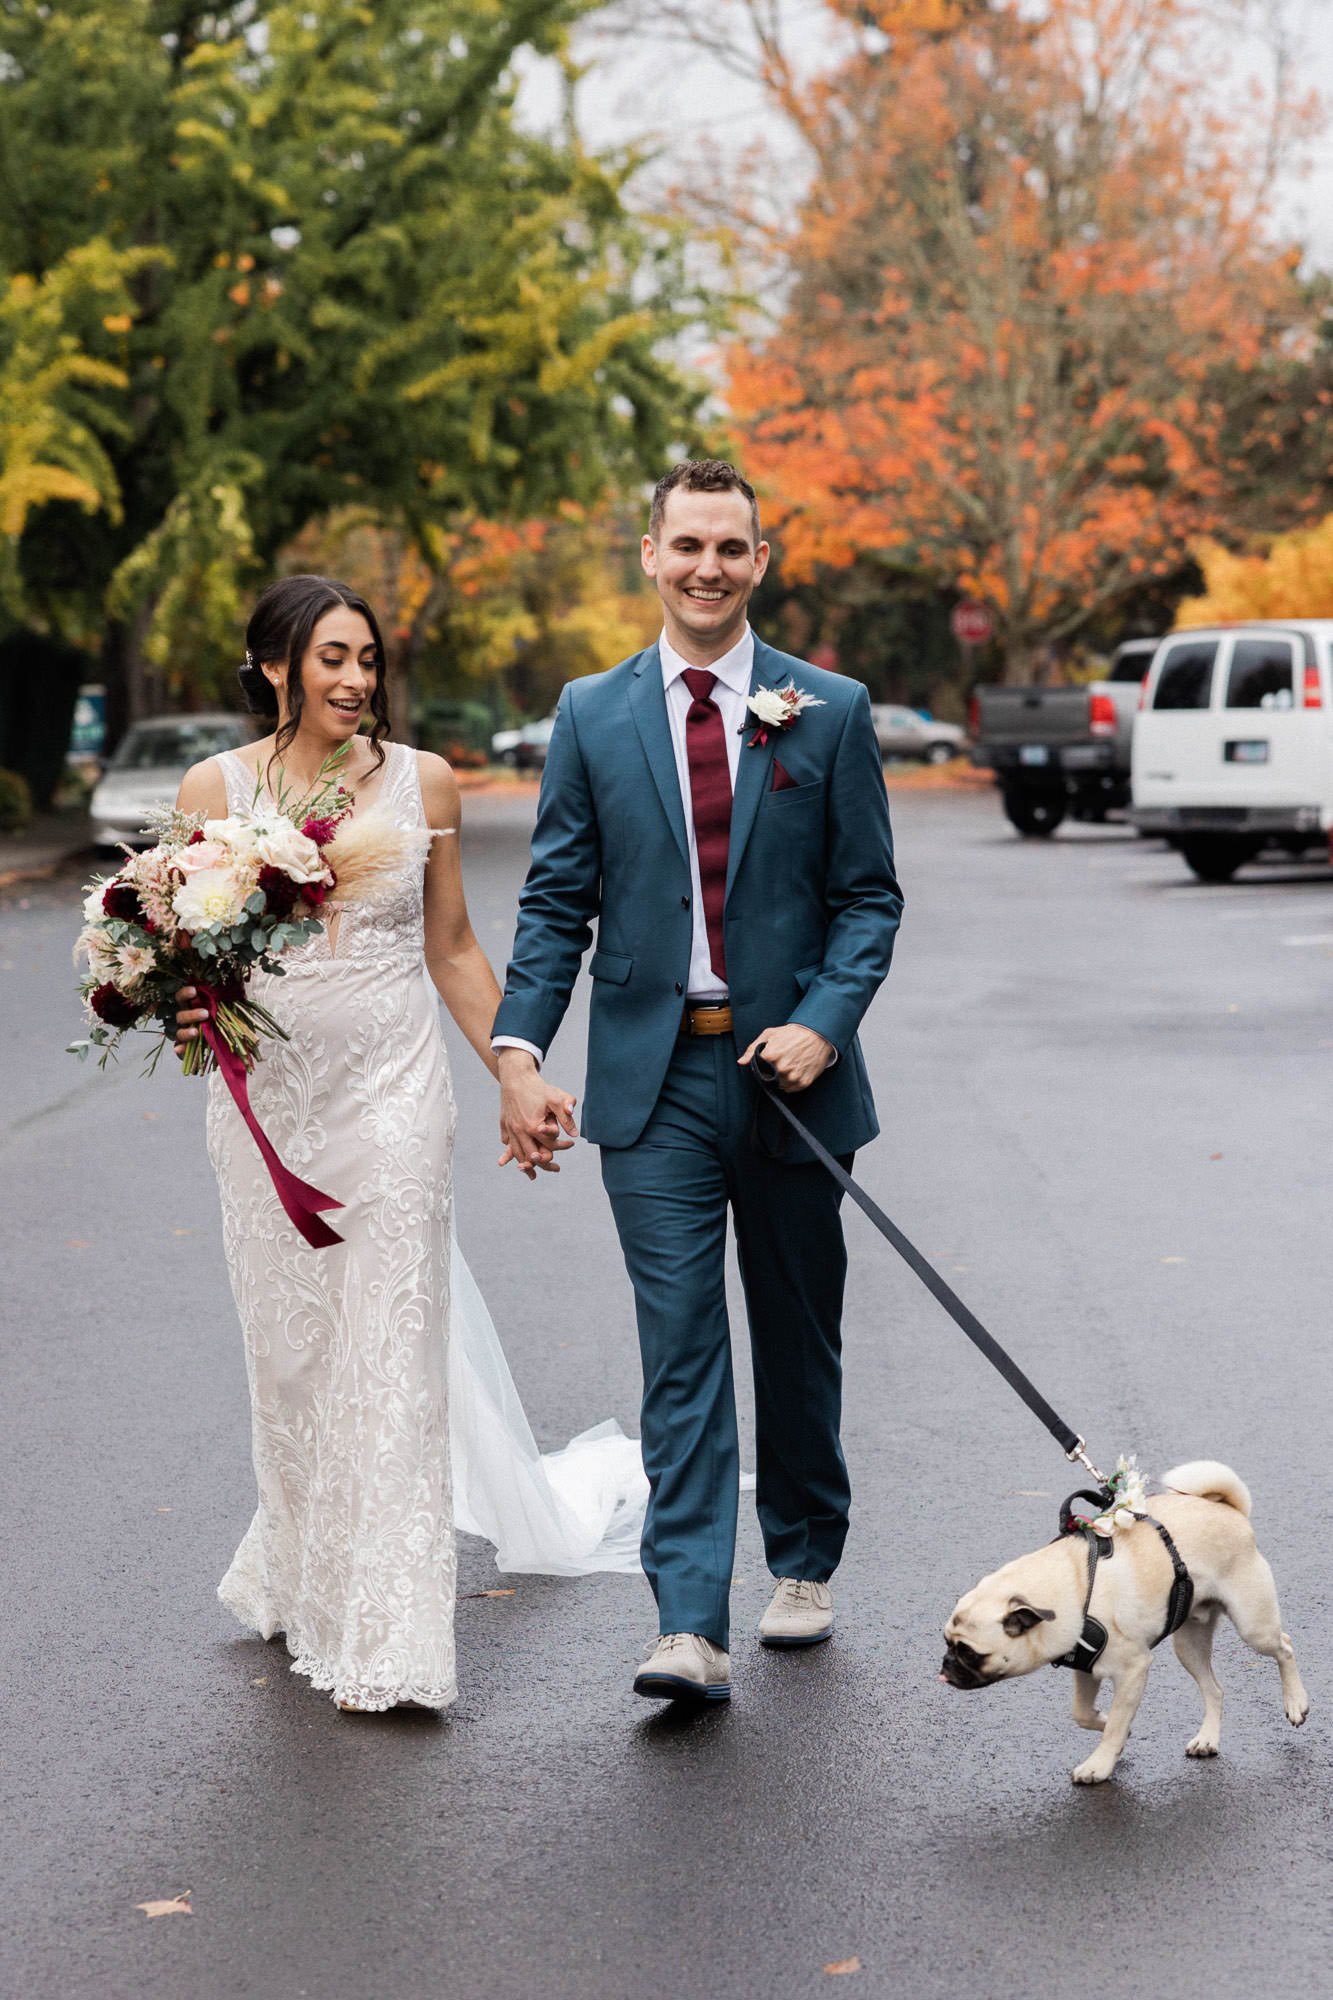 bride in white dress holding floral bouquet holds hand and walks with groom in blue suit and dog on leash